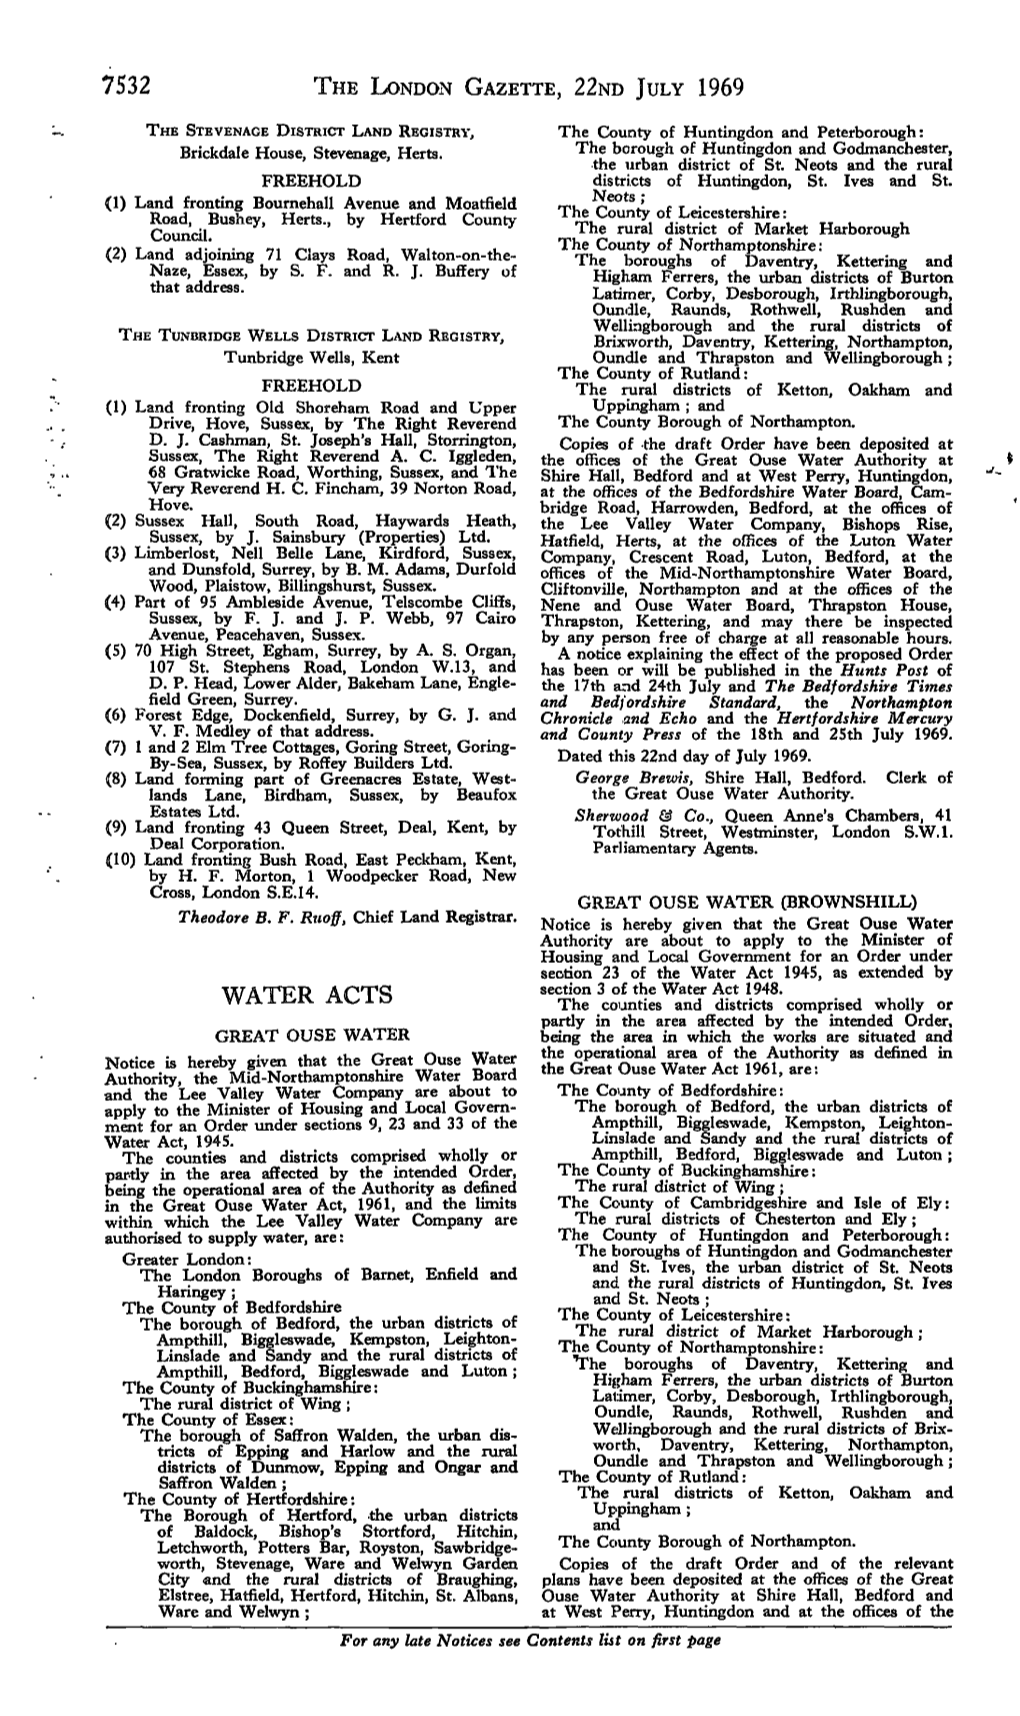 7532 the London Gazette, 22Nd July 1969 Water Acts